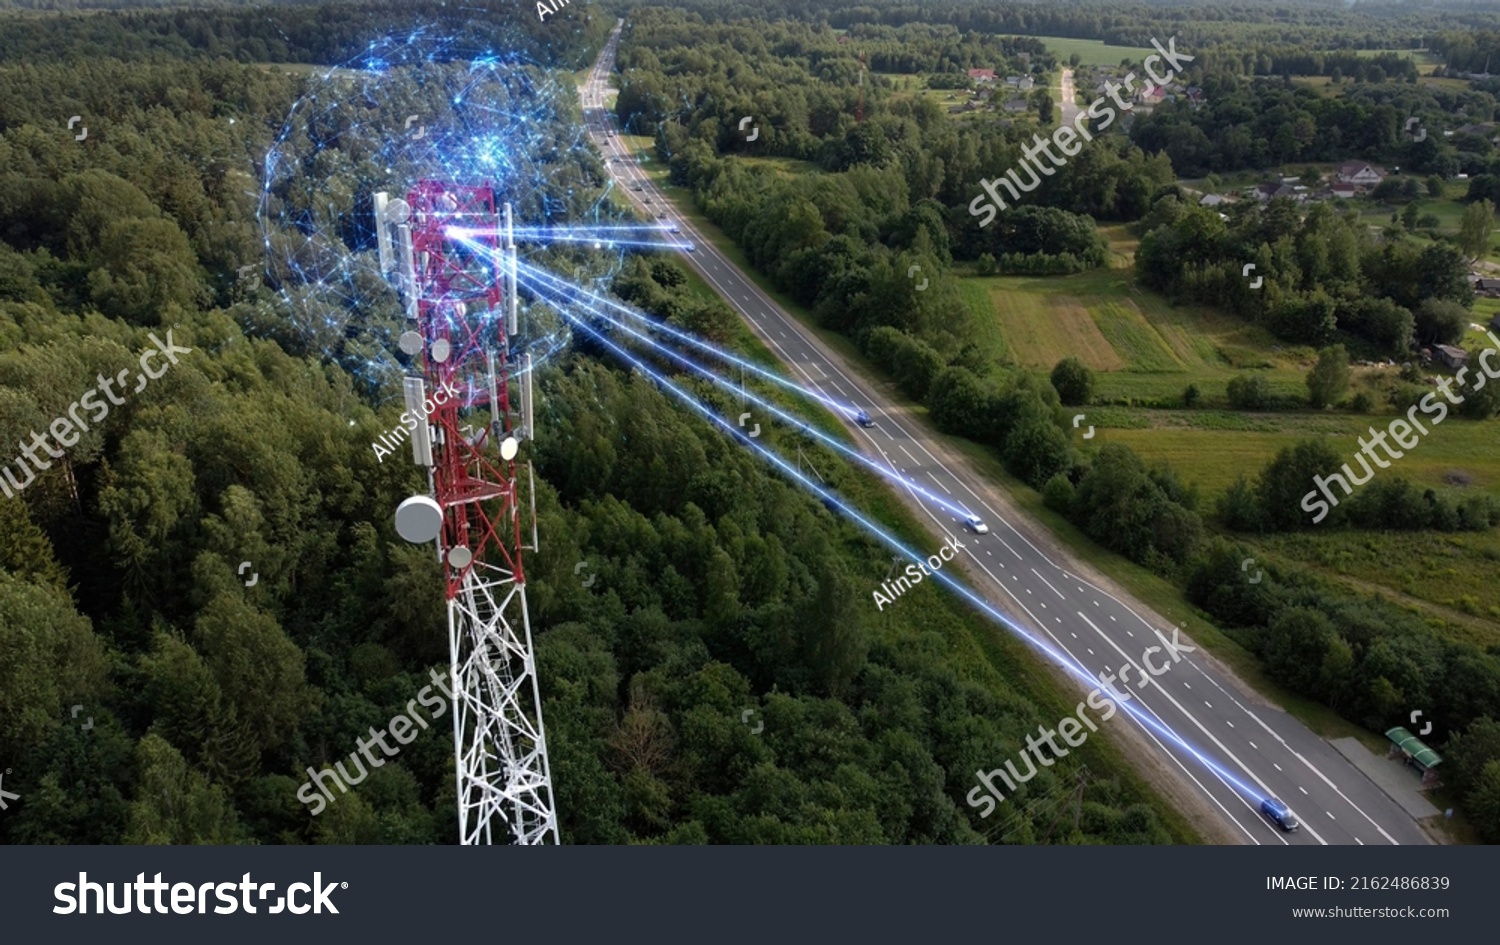 Aerial view of a telecommunications antenna transmitting signals and collecting information about electronic smart self-driving cars. Concept:Car Scan, GPS Tracking, Smart Roads, IoT, Traffic Control #2162486839